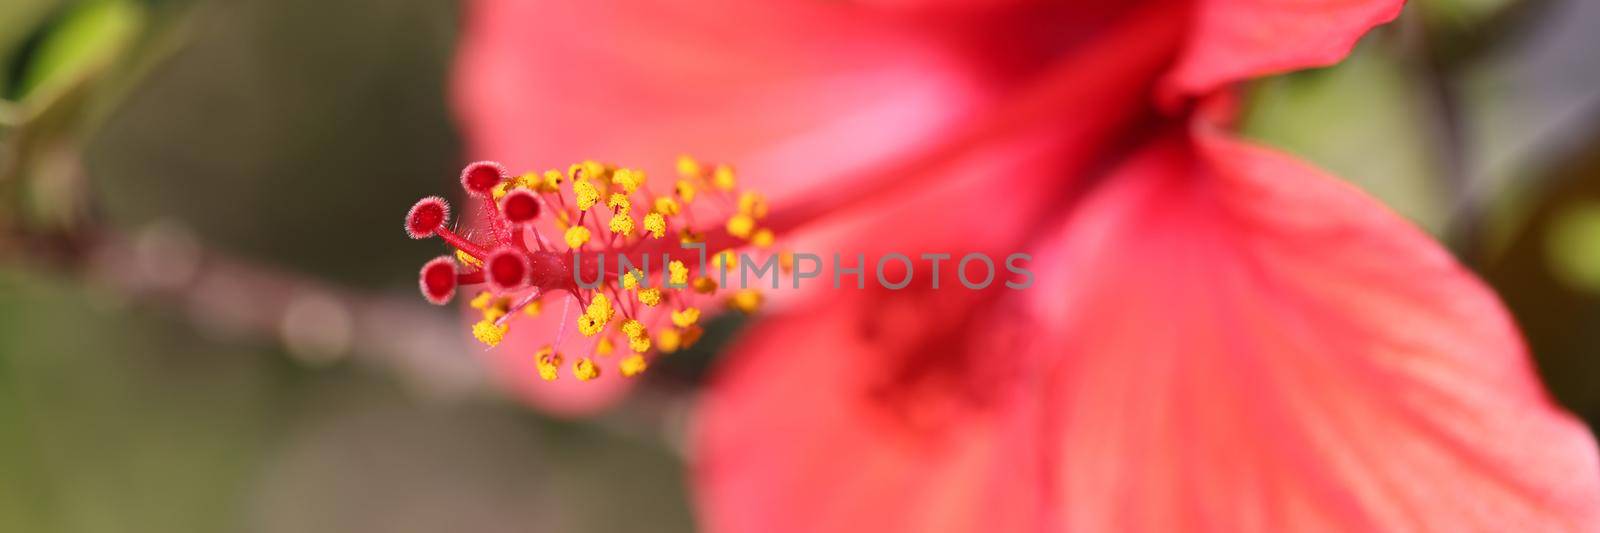 Closeup of beautiful red large flower with pistil. Beautiful nature concept